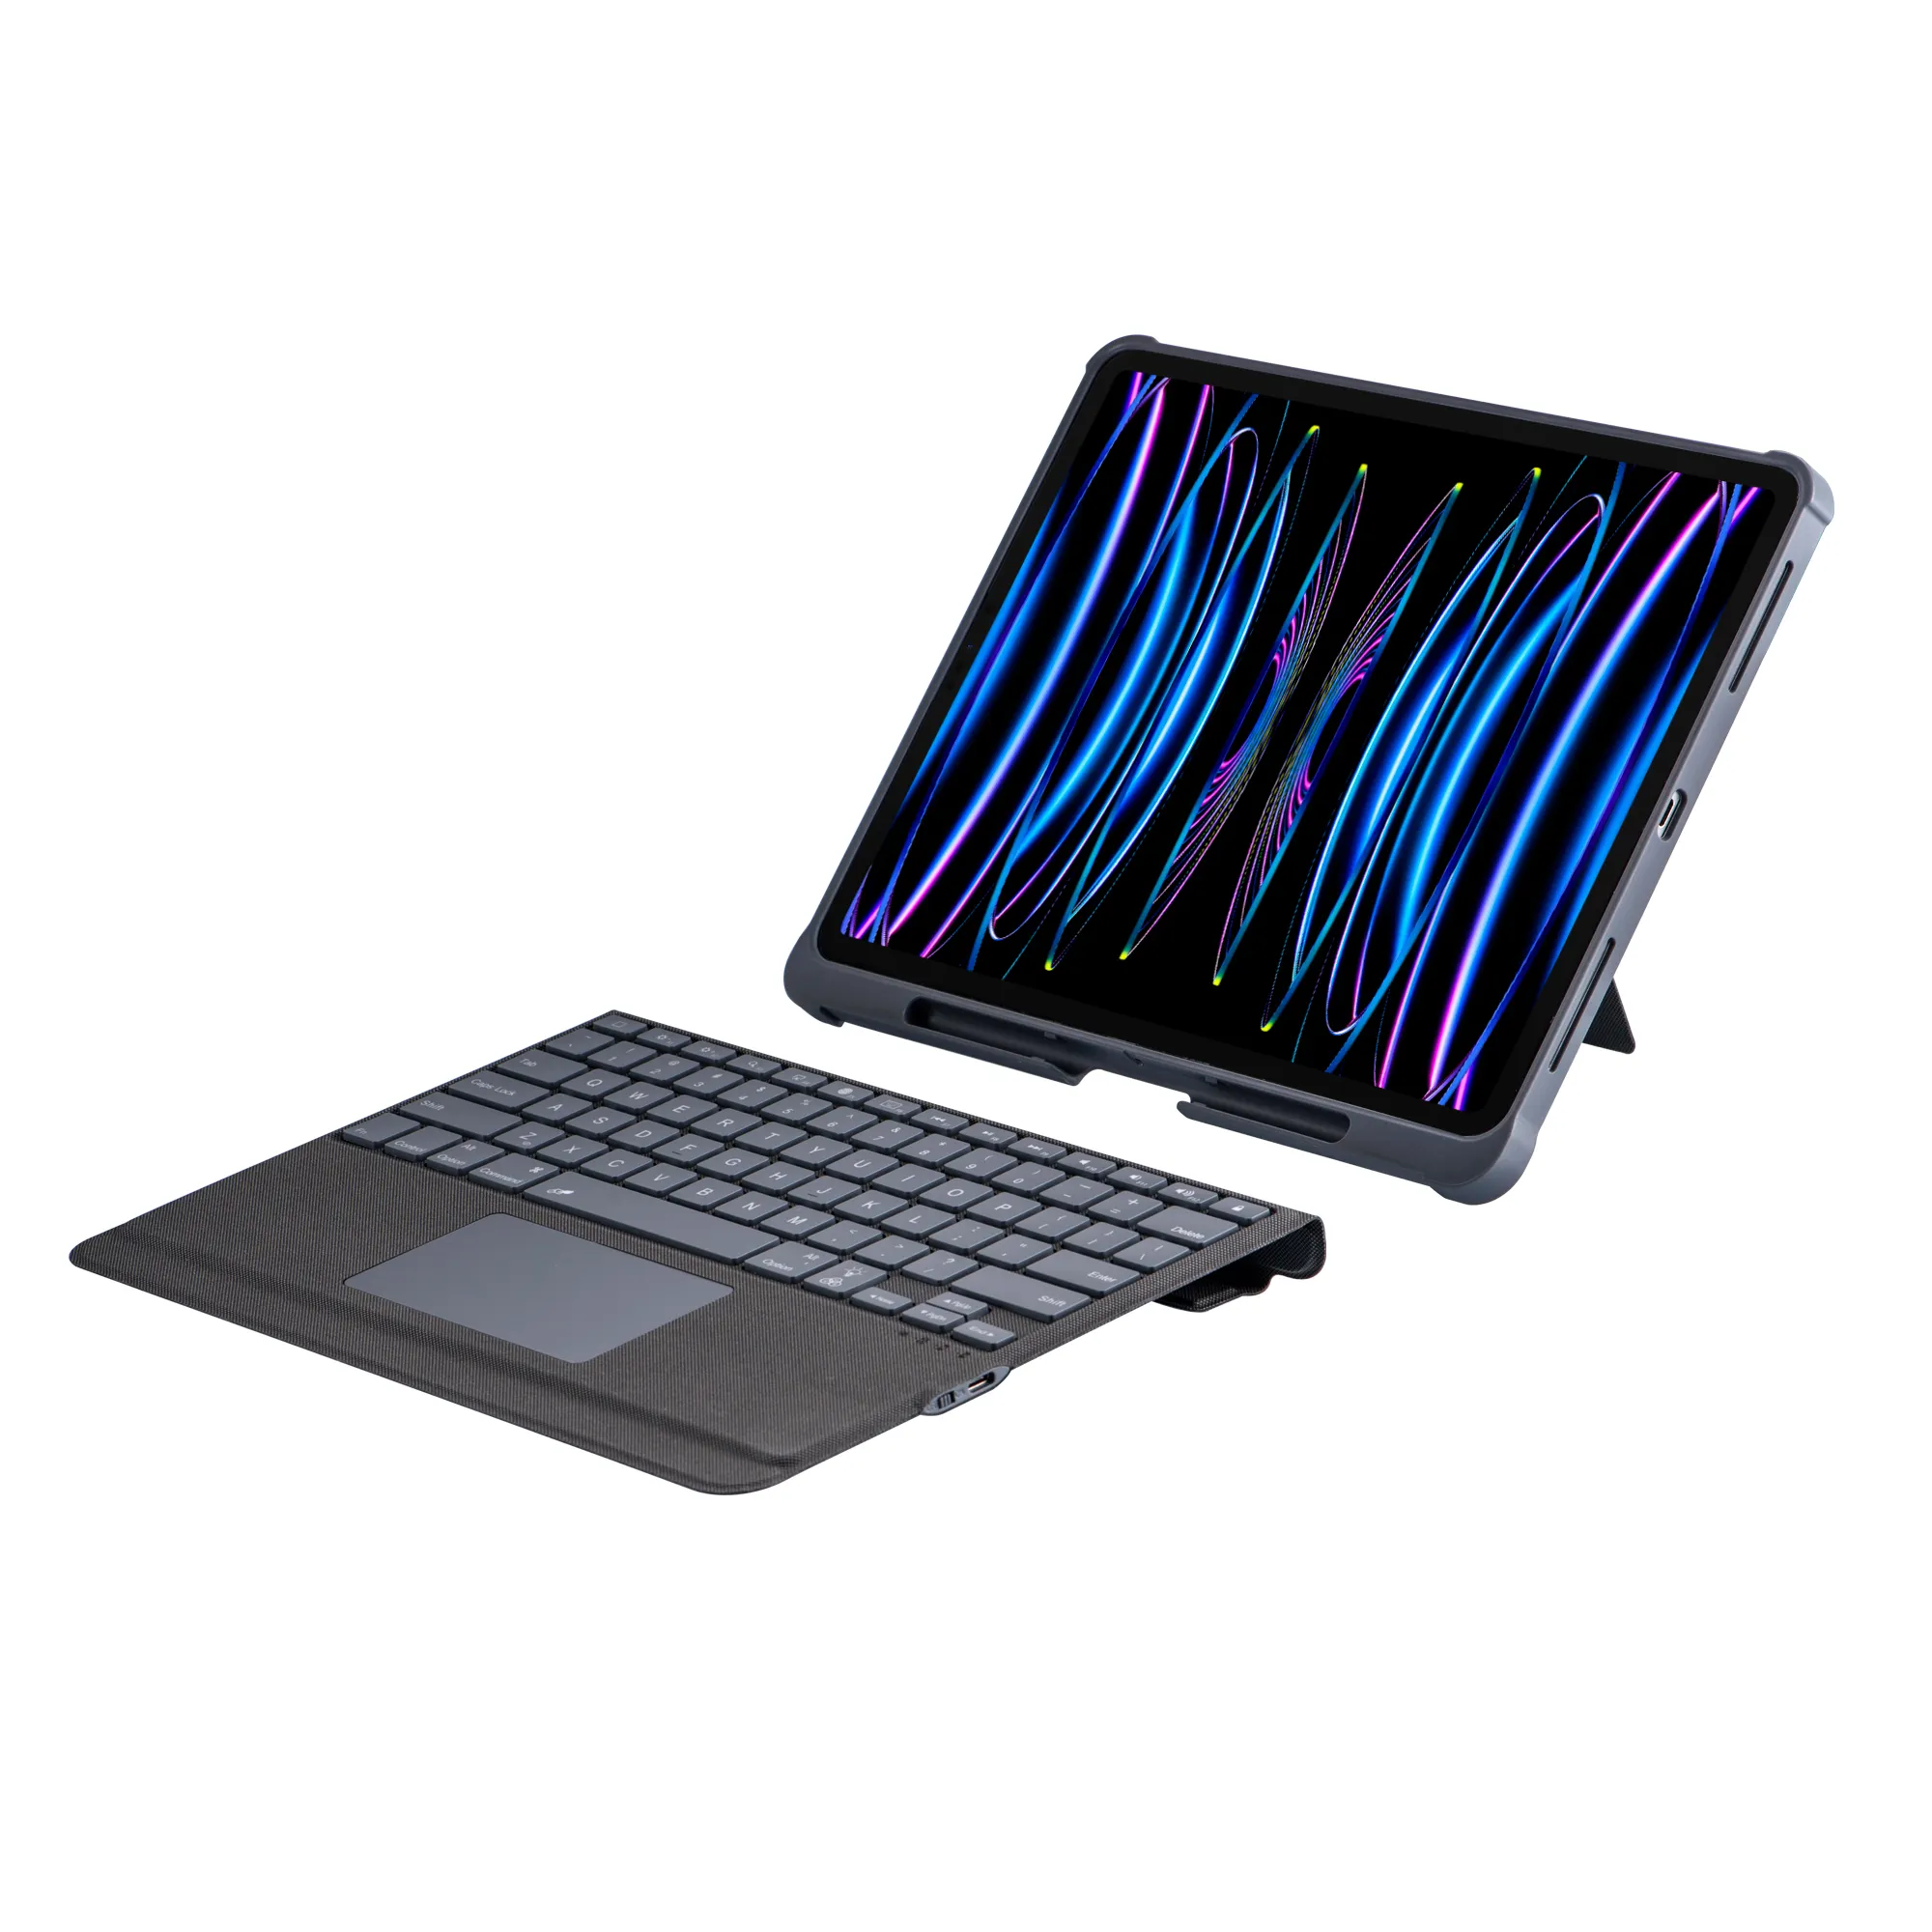 2021-2020-2018 for iPad Keyboard Case Cover with Touchpad and Pencil Holder 7 Color LED RGB Backlight Split Style